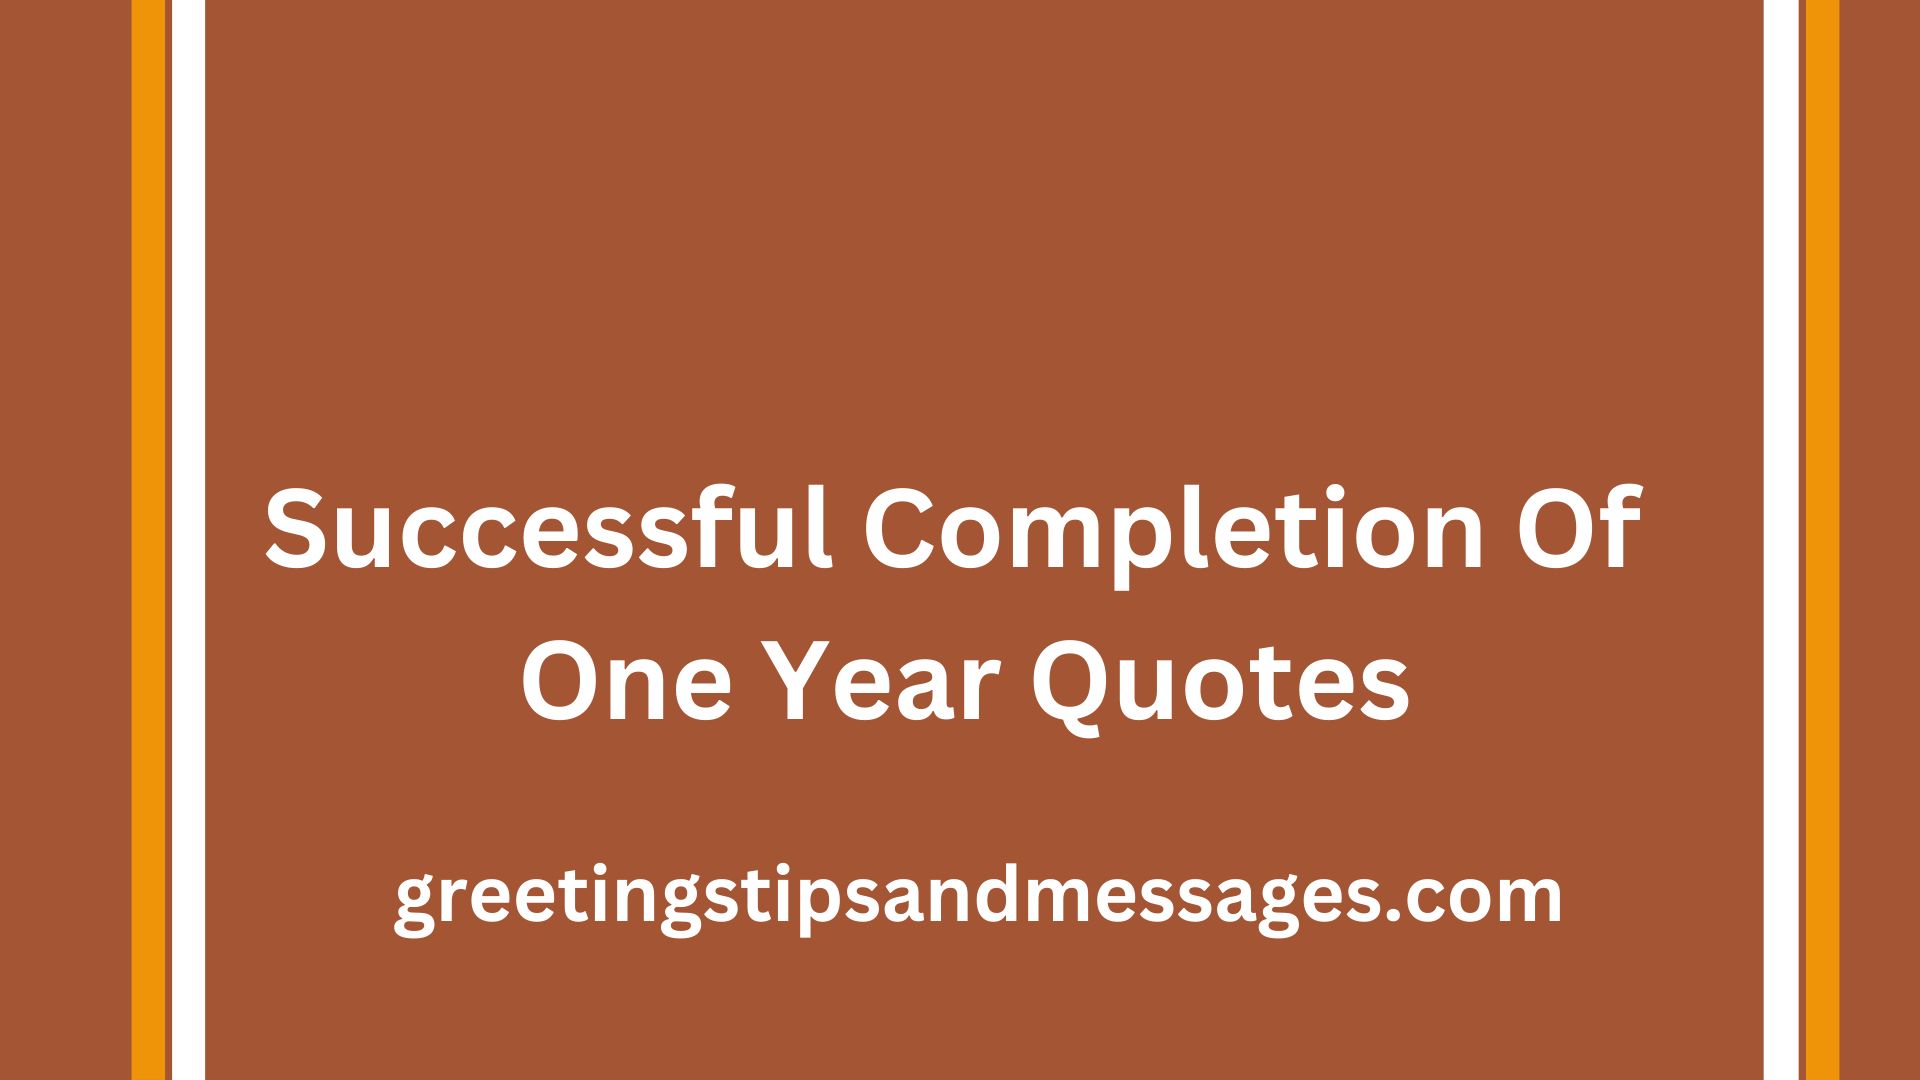 Successful Completion Of One Year Quotes